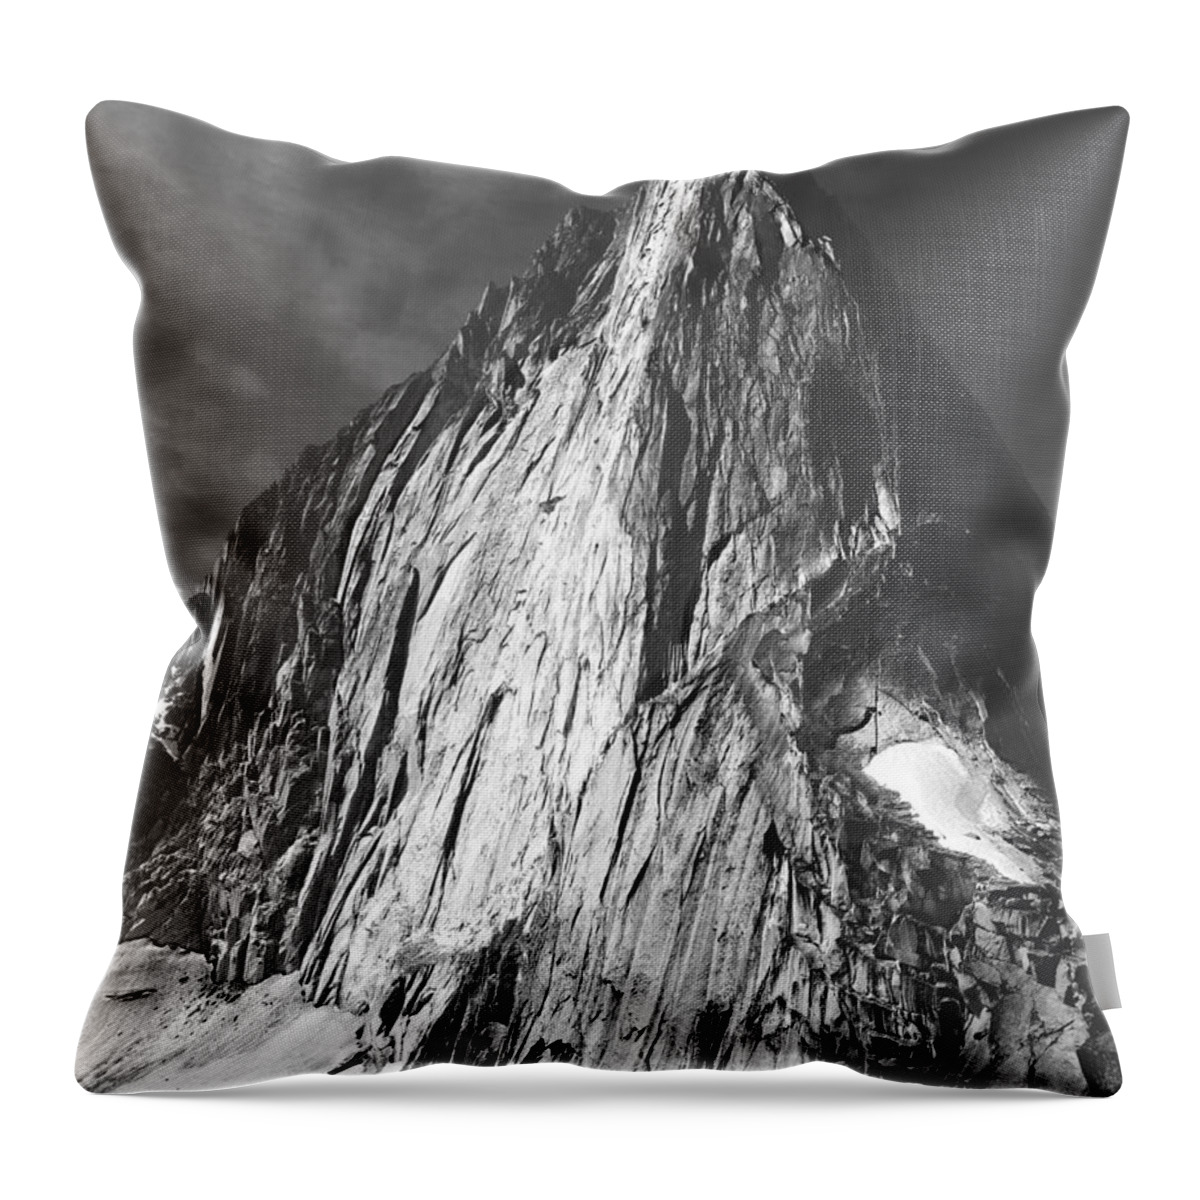 Bugaboo Spire Throw Pillow featuring the photograph 102756 Bugaboo Spire by Ed Cooper Photography